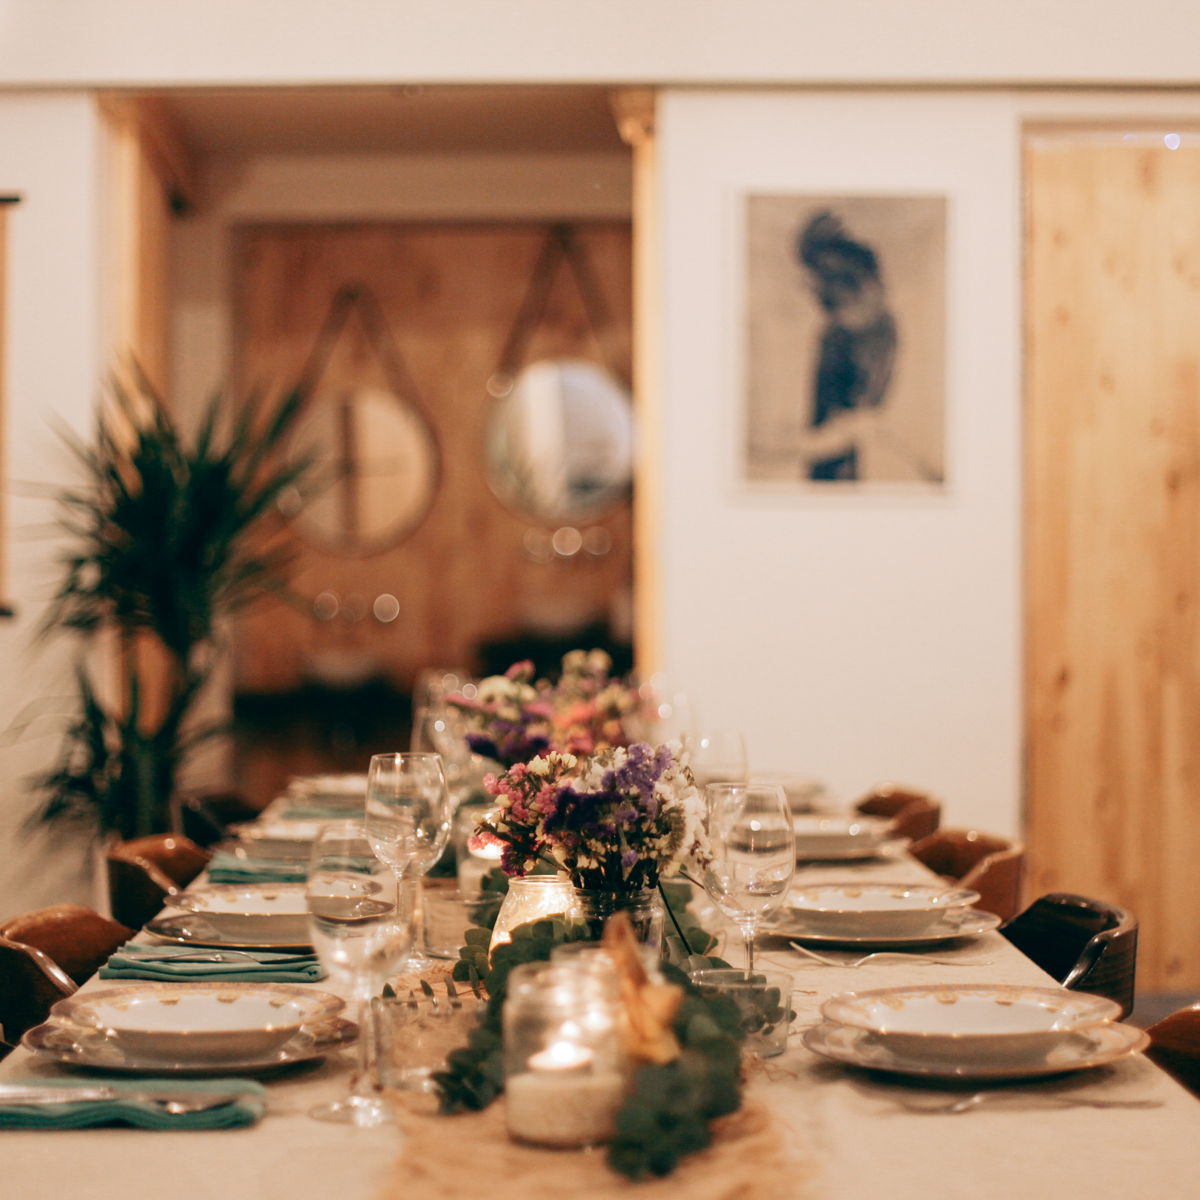 Delicious farm to table dinner in the heart of Barcelona